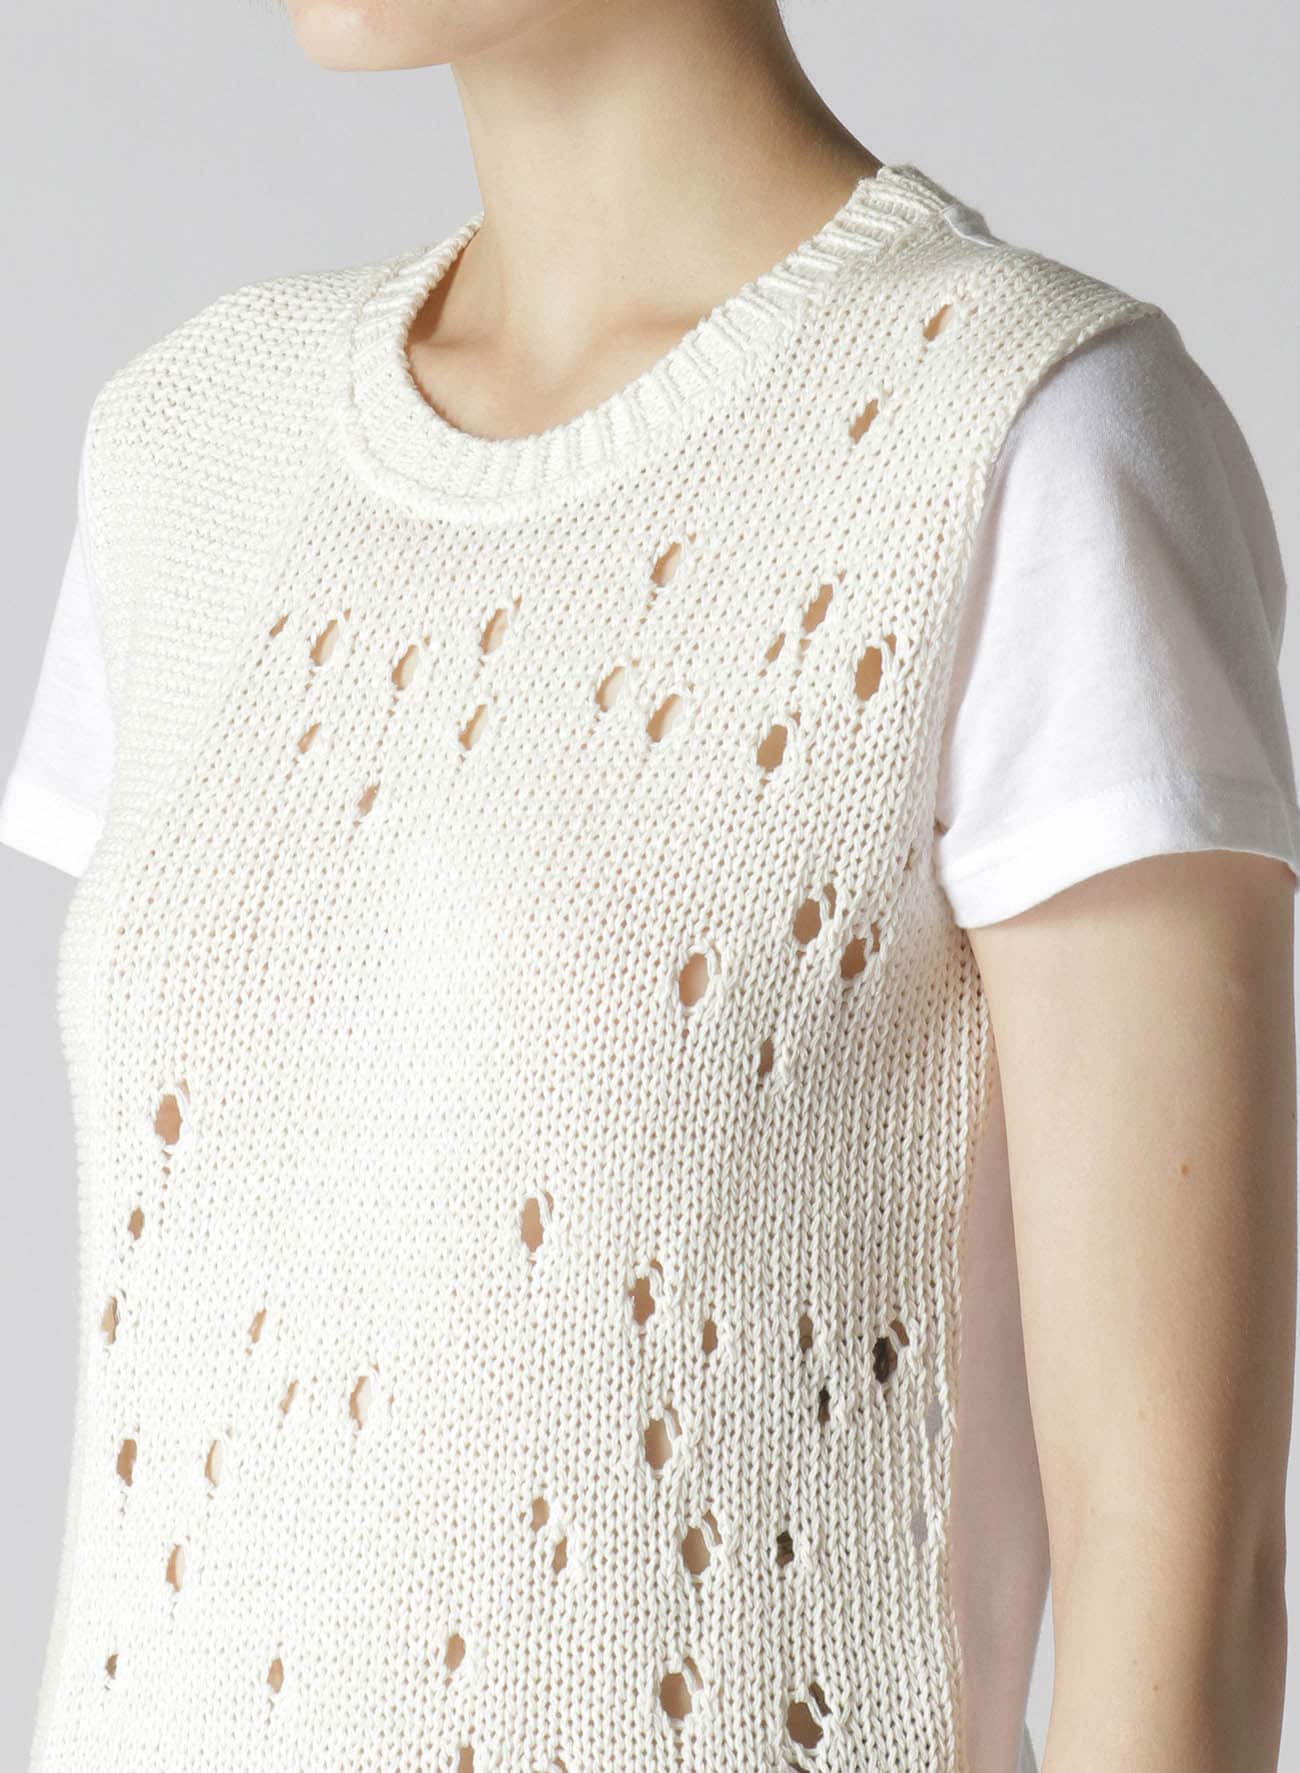 HALF SLEEVE T-SHIRT WITH OPENWORKED KNIT